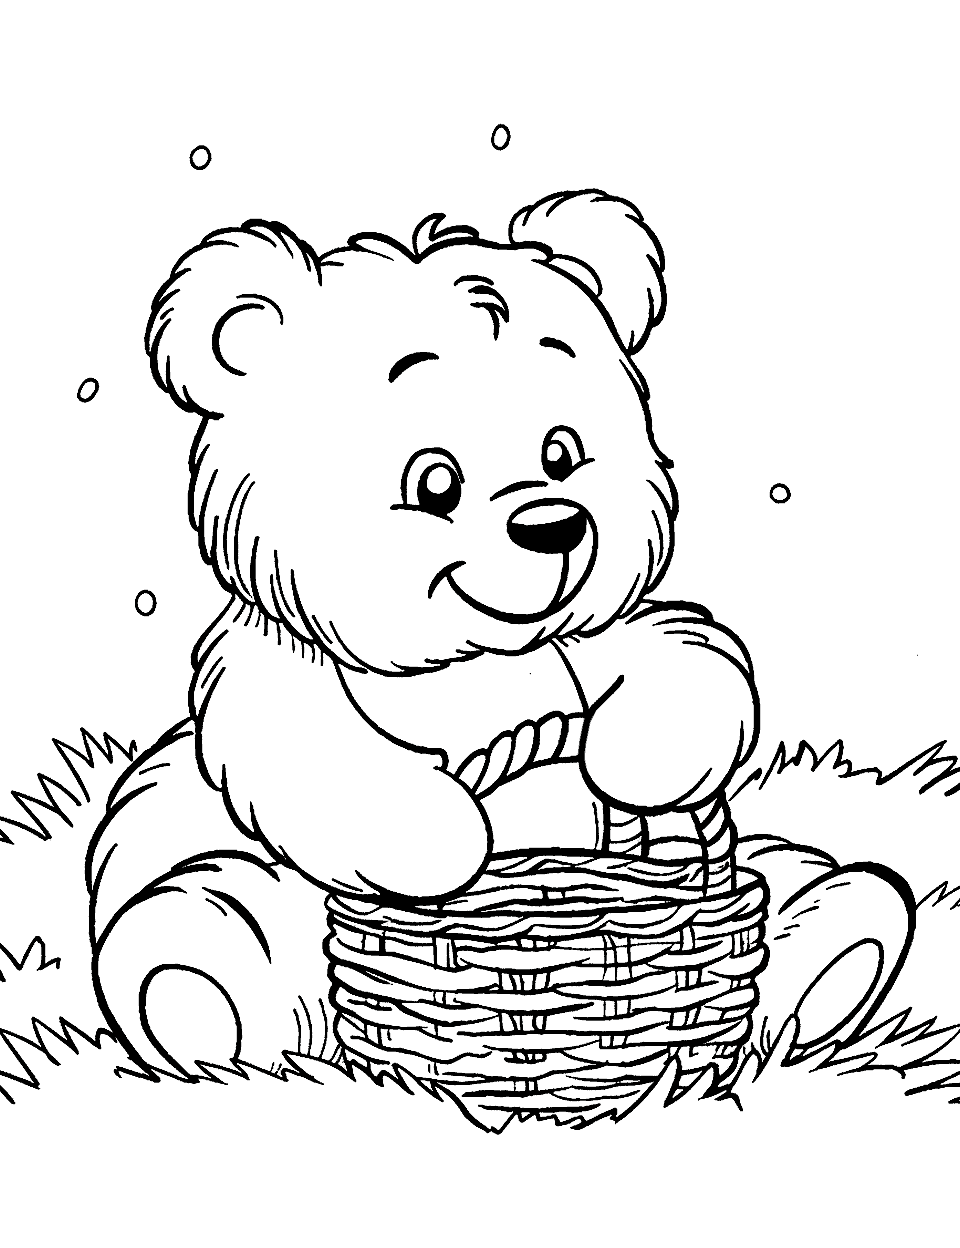 Teddy Bear with a Picnic Basket Coloring Page - A teddy bear ready for a picnic with a basket.